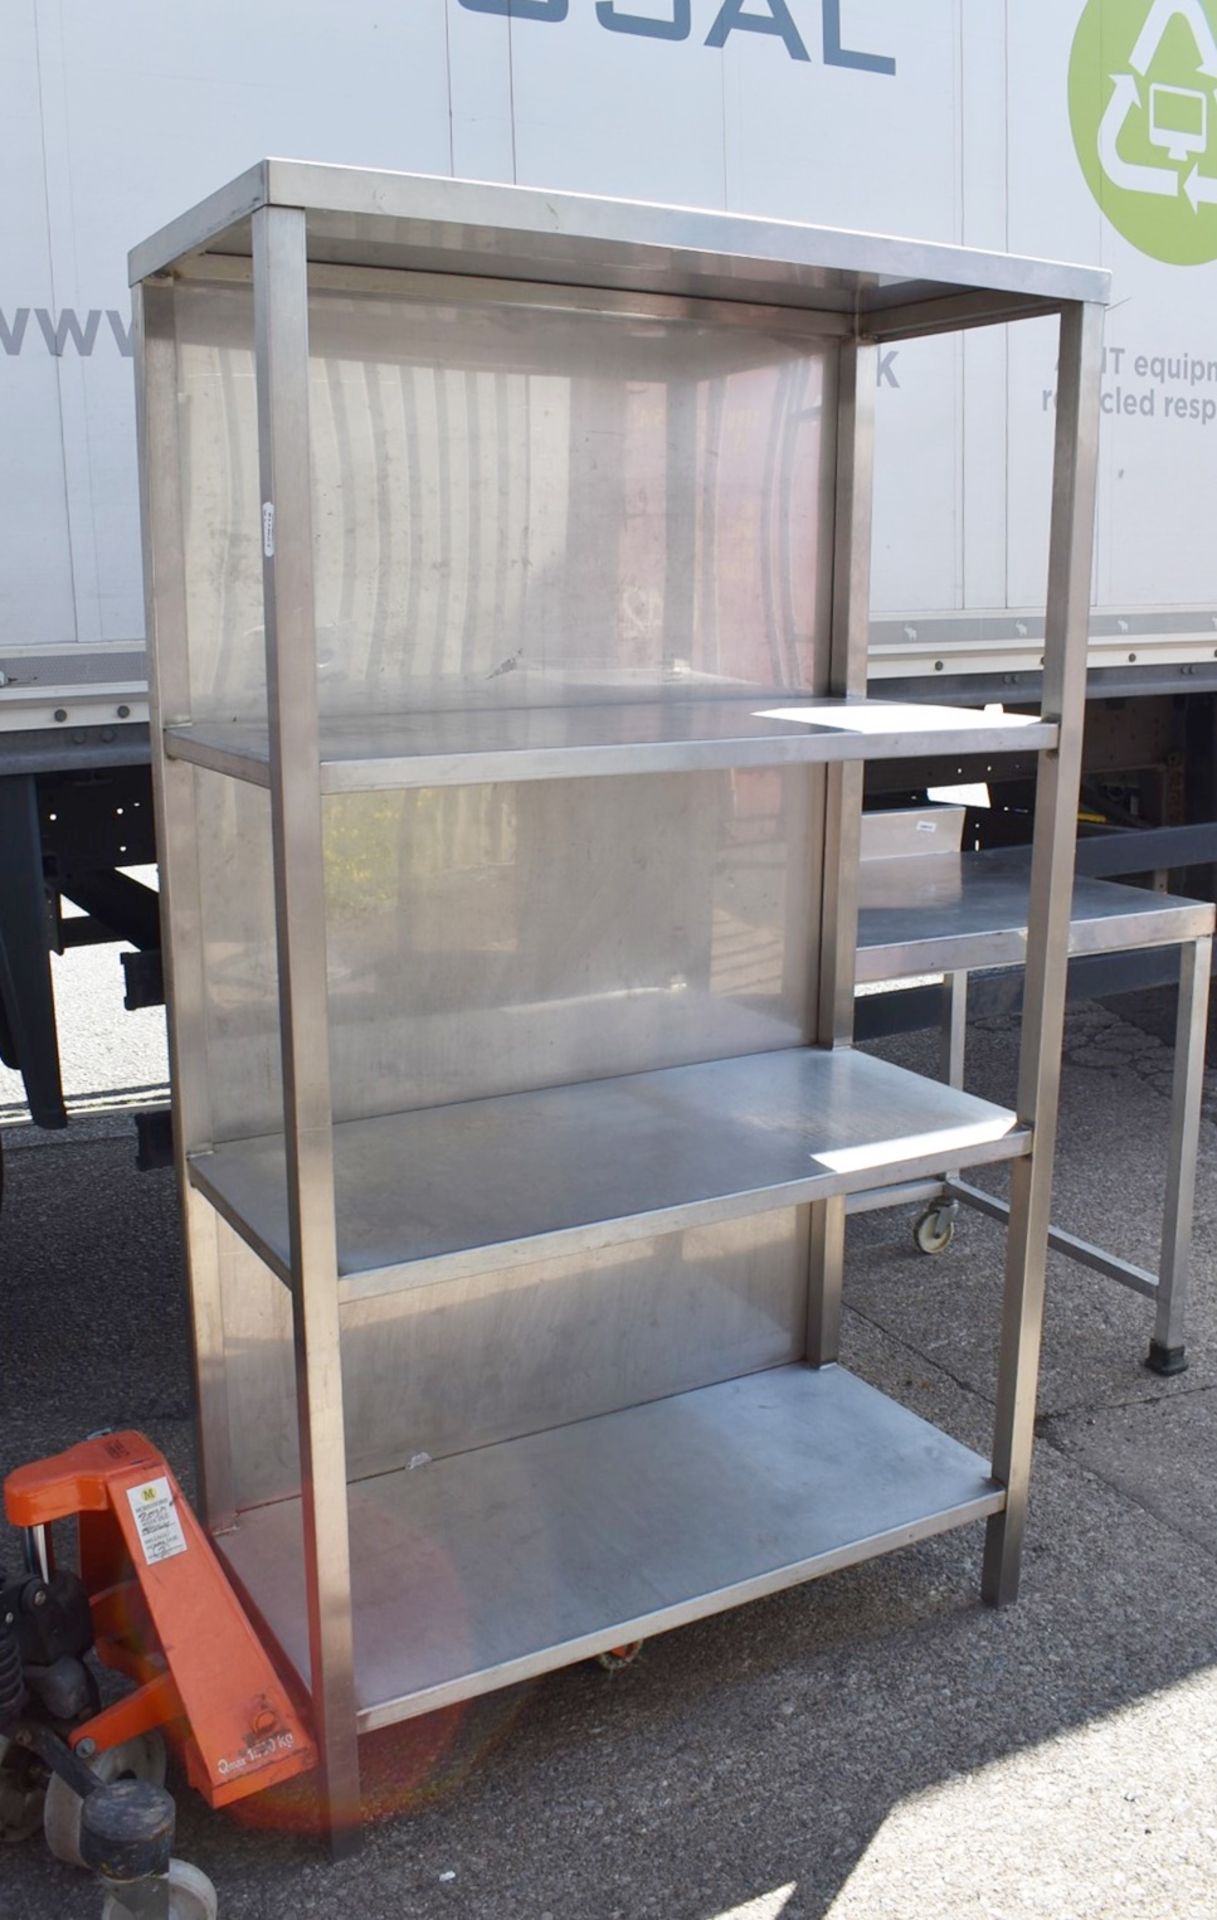 1 x Stainless Steel Commercial Kitchen Shelf Unit - Three Tier With Closed Back Panel - Recently Rem - Image 7 of 7